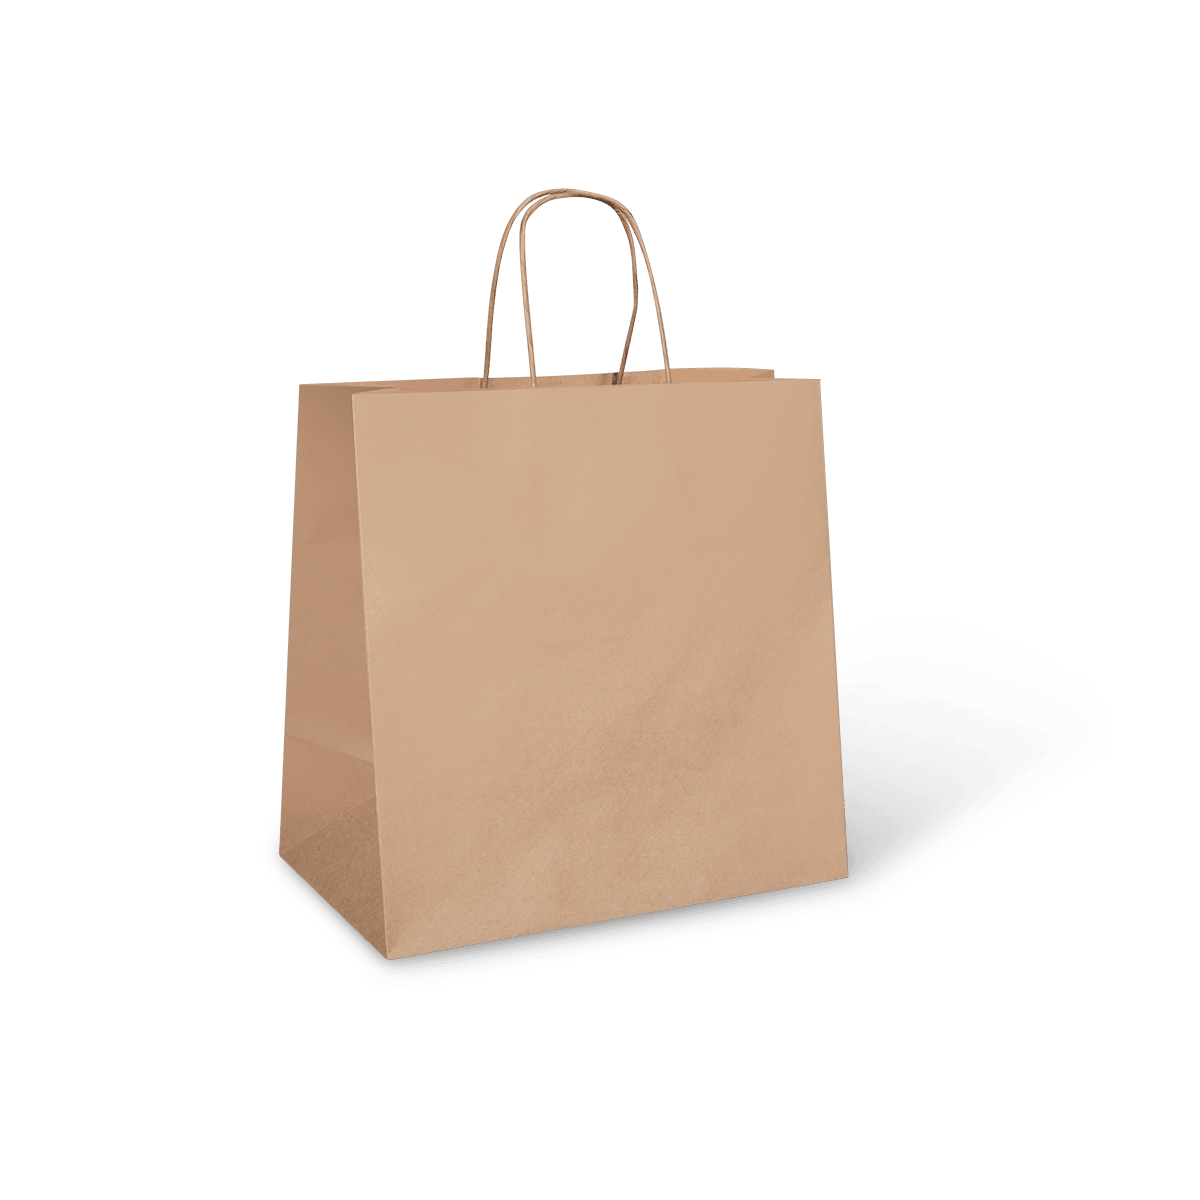 Share 78+ cheap custom paper bags - in.cdgdbentre